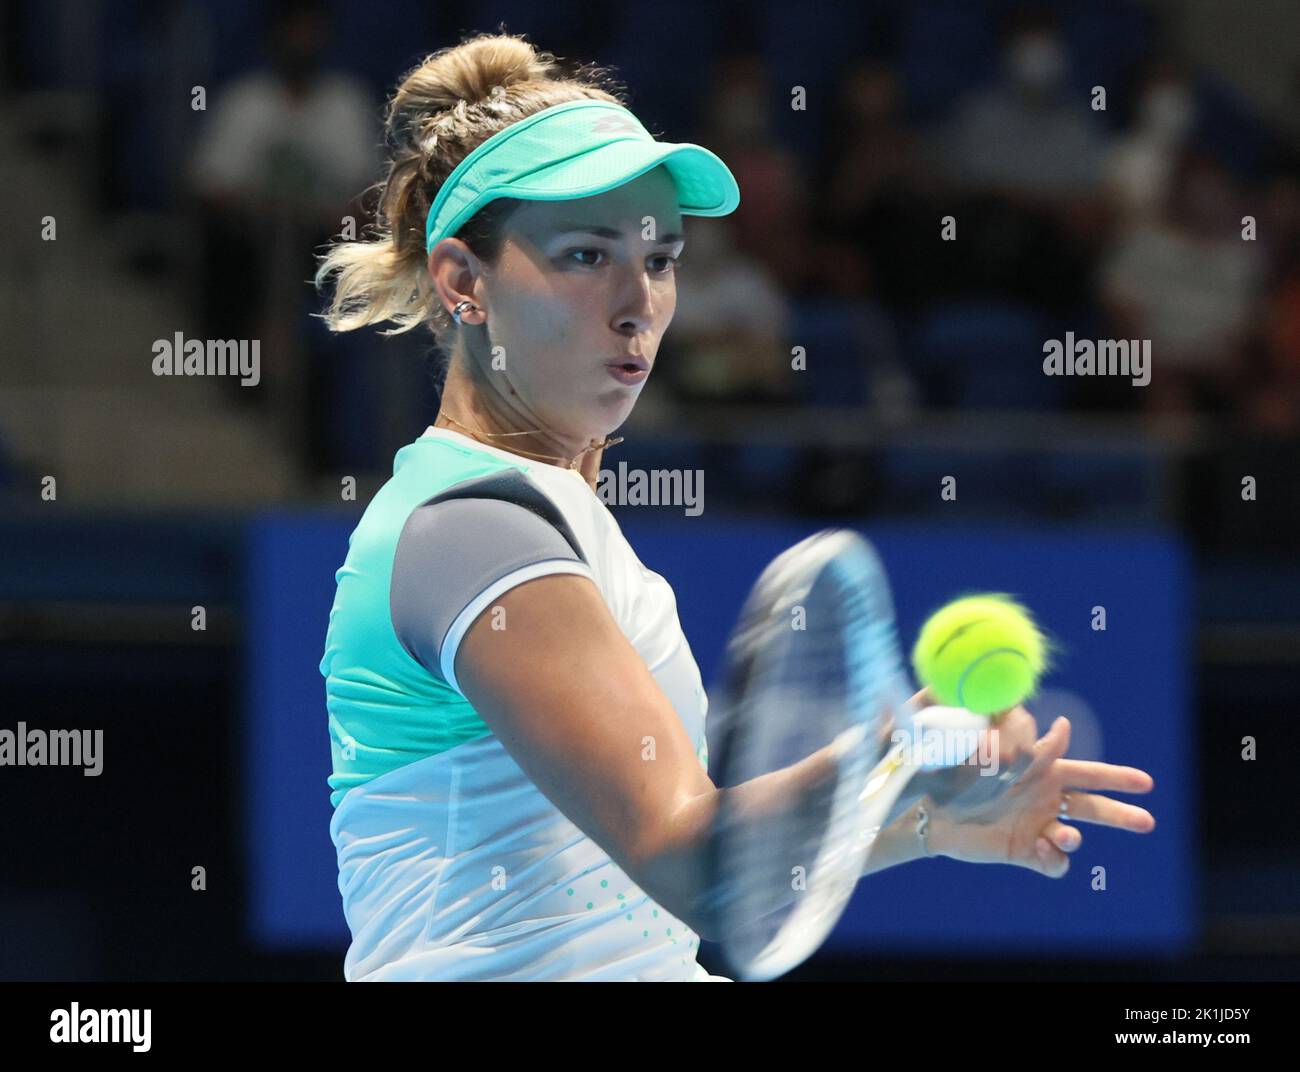 Tokyo, Japan. 19th Sep, 2022. Elise Mertens of Belgium returns the ball against China's Wang Qiang at the singles first round match at the Toray Pan Pacific Open tennis tournament at the Ariake Coliseum in Tokyo on Monday, September 19, 2022. Mertens defeated Wang 6-0, 6-3. Credit: Yoshio Tsunoda/AFLO/Alamy Live News Stock Photo